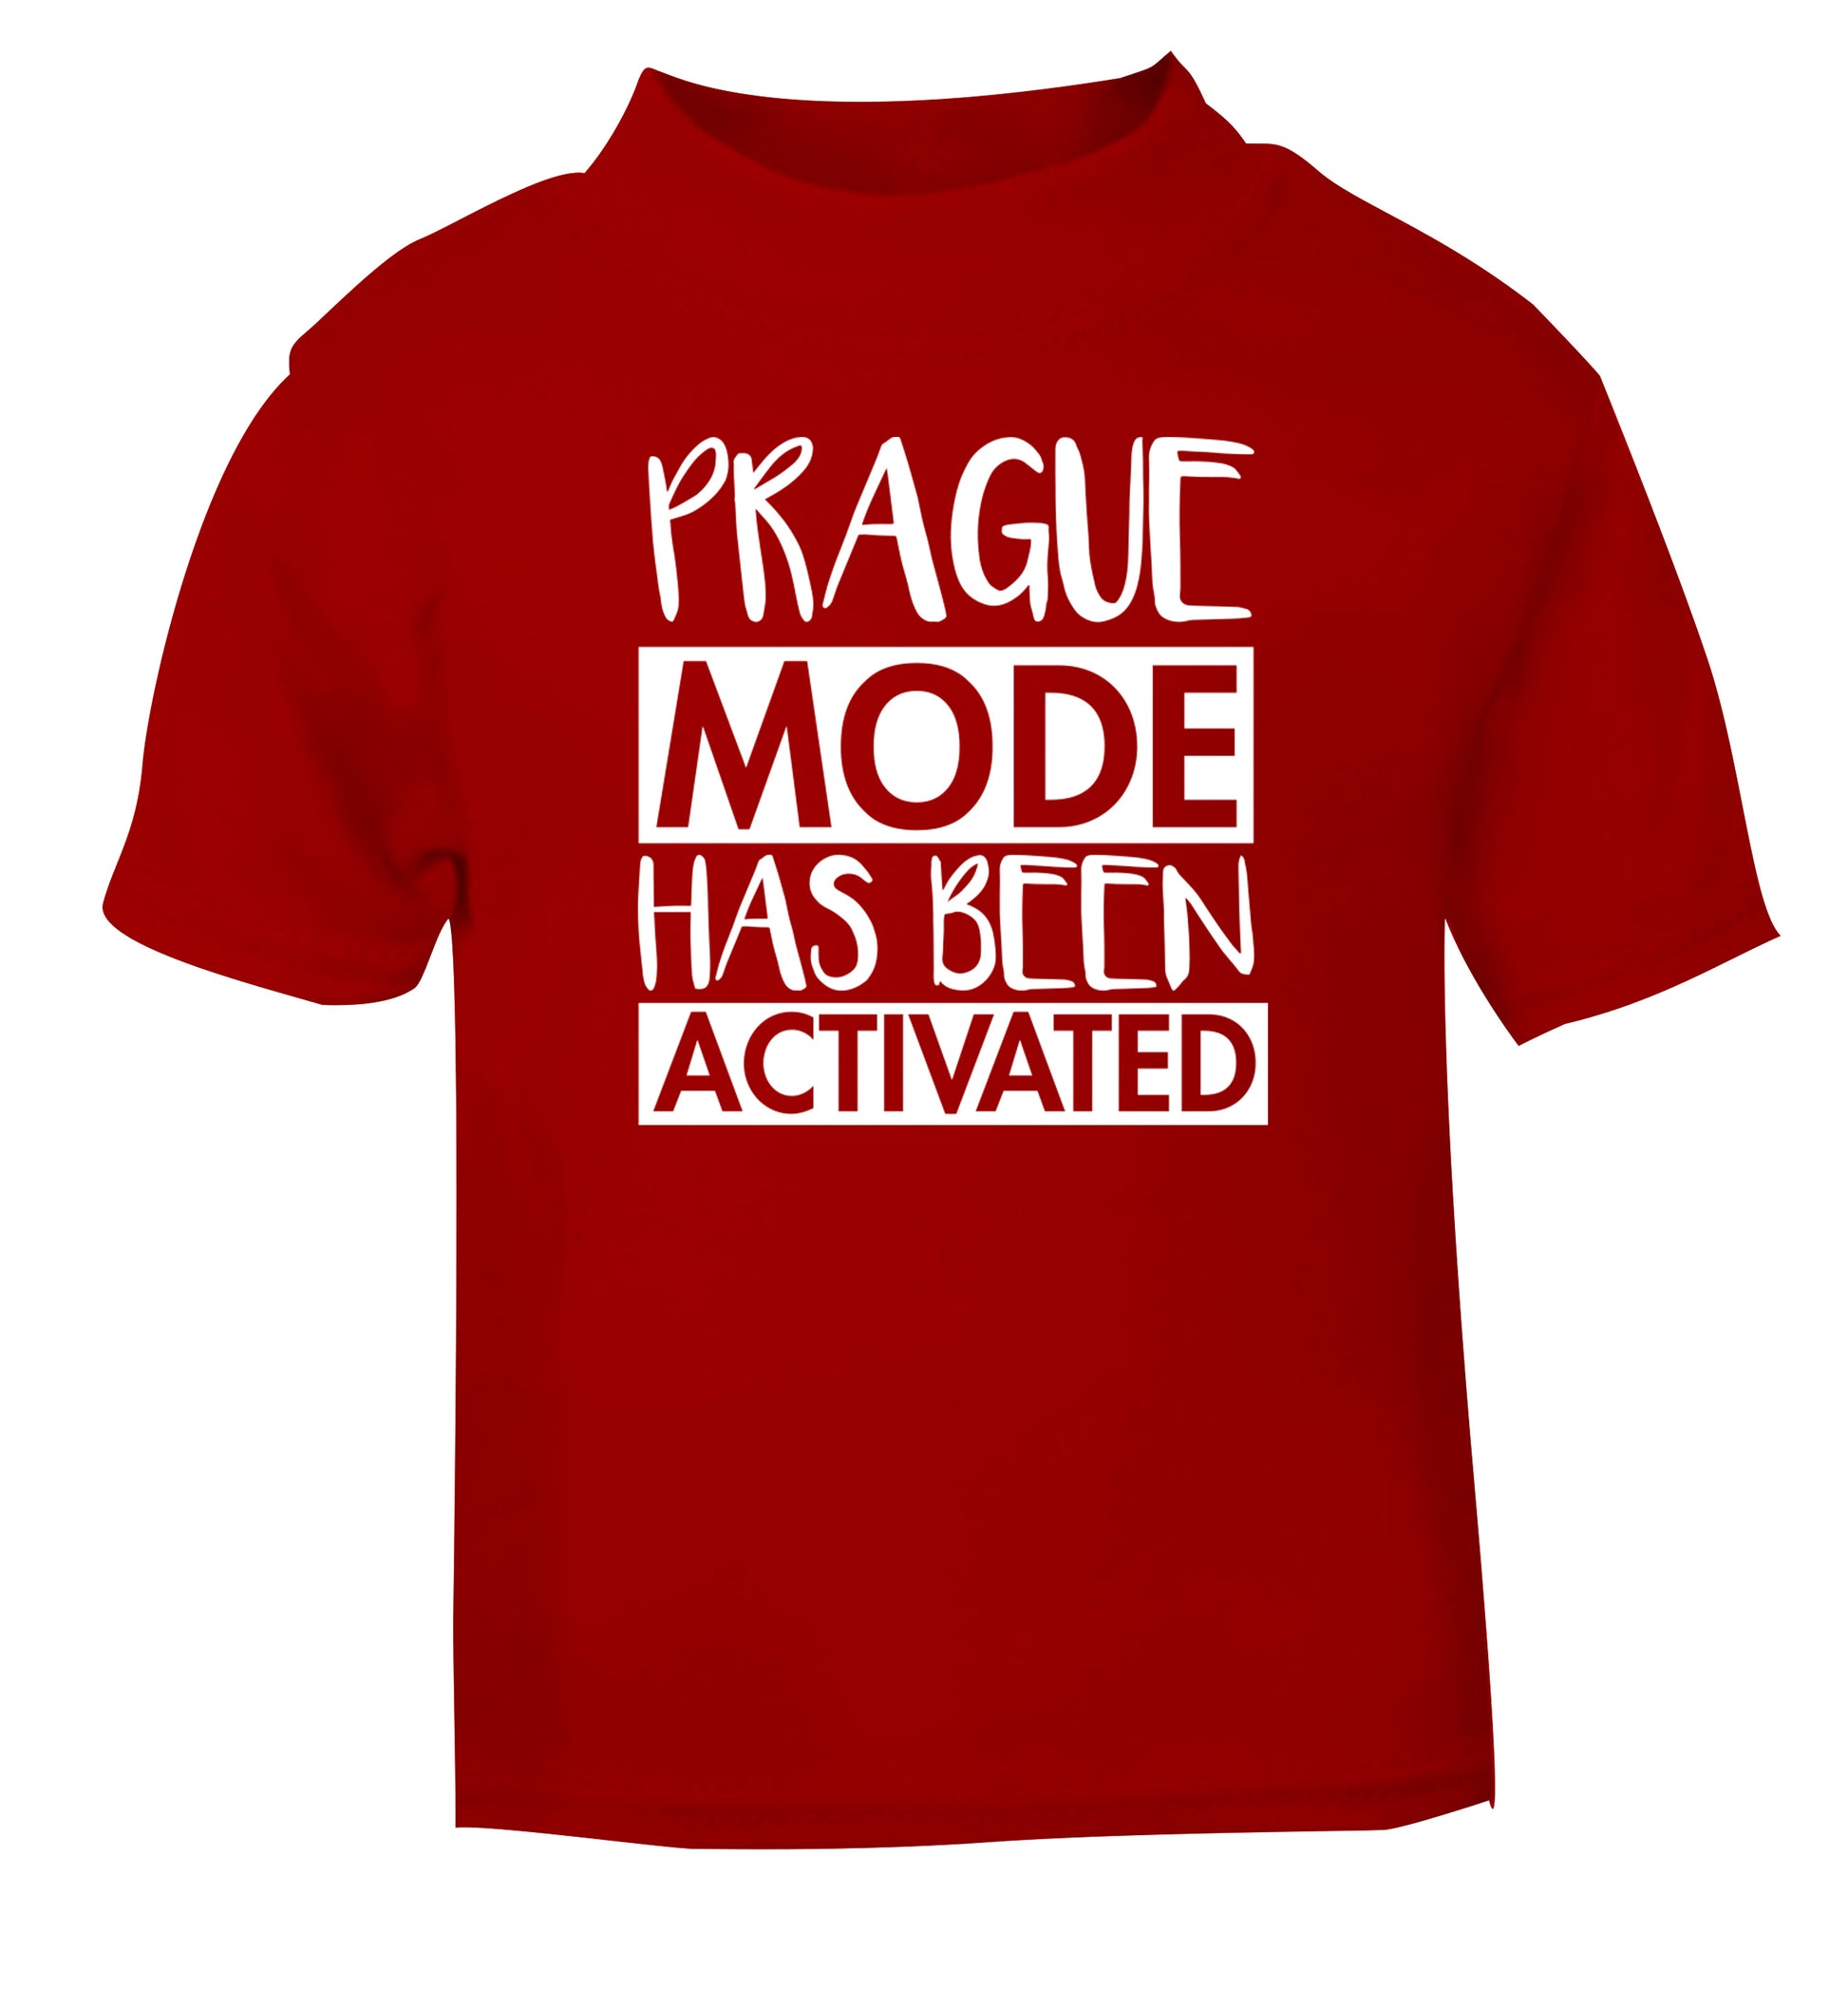 Prague mode has been activated red Baby Toddler Tshirt 2 Years